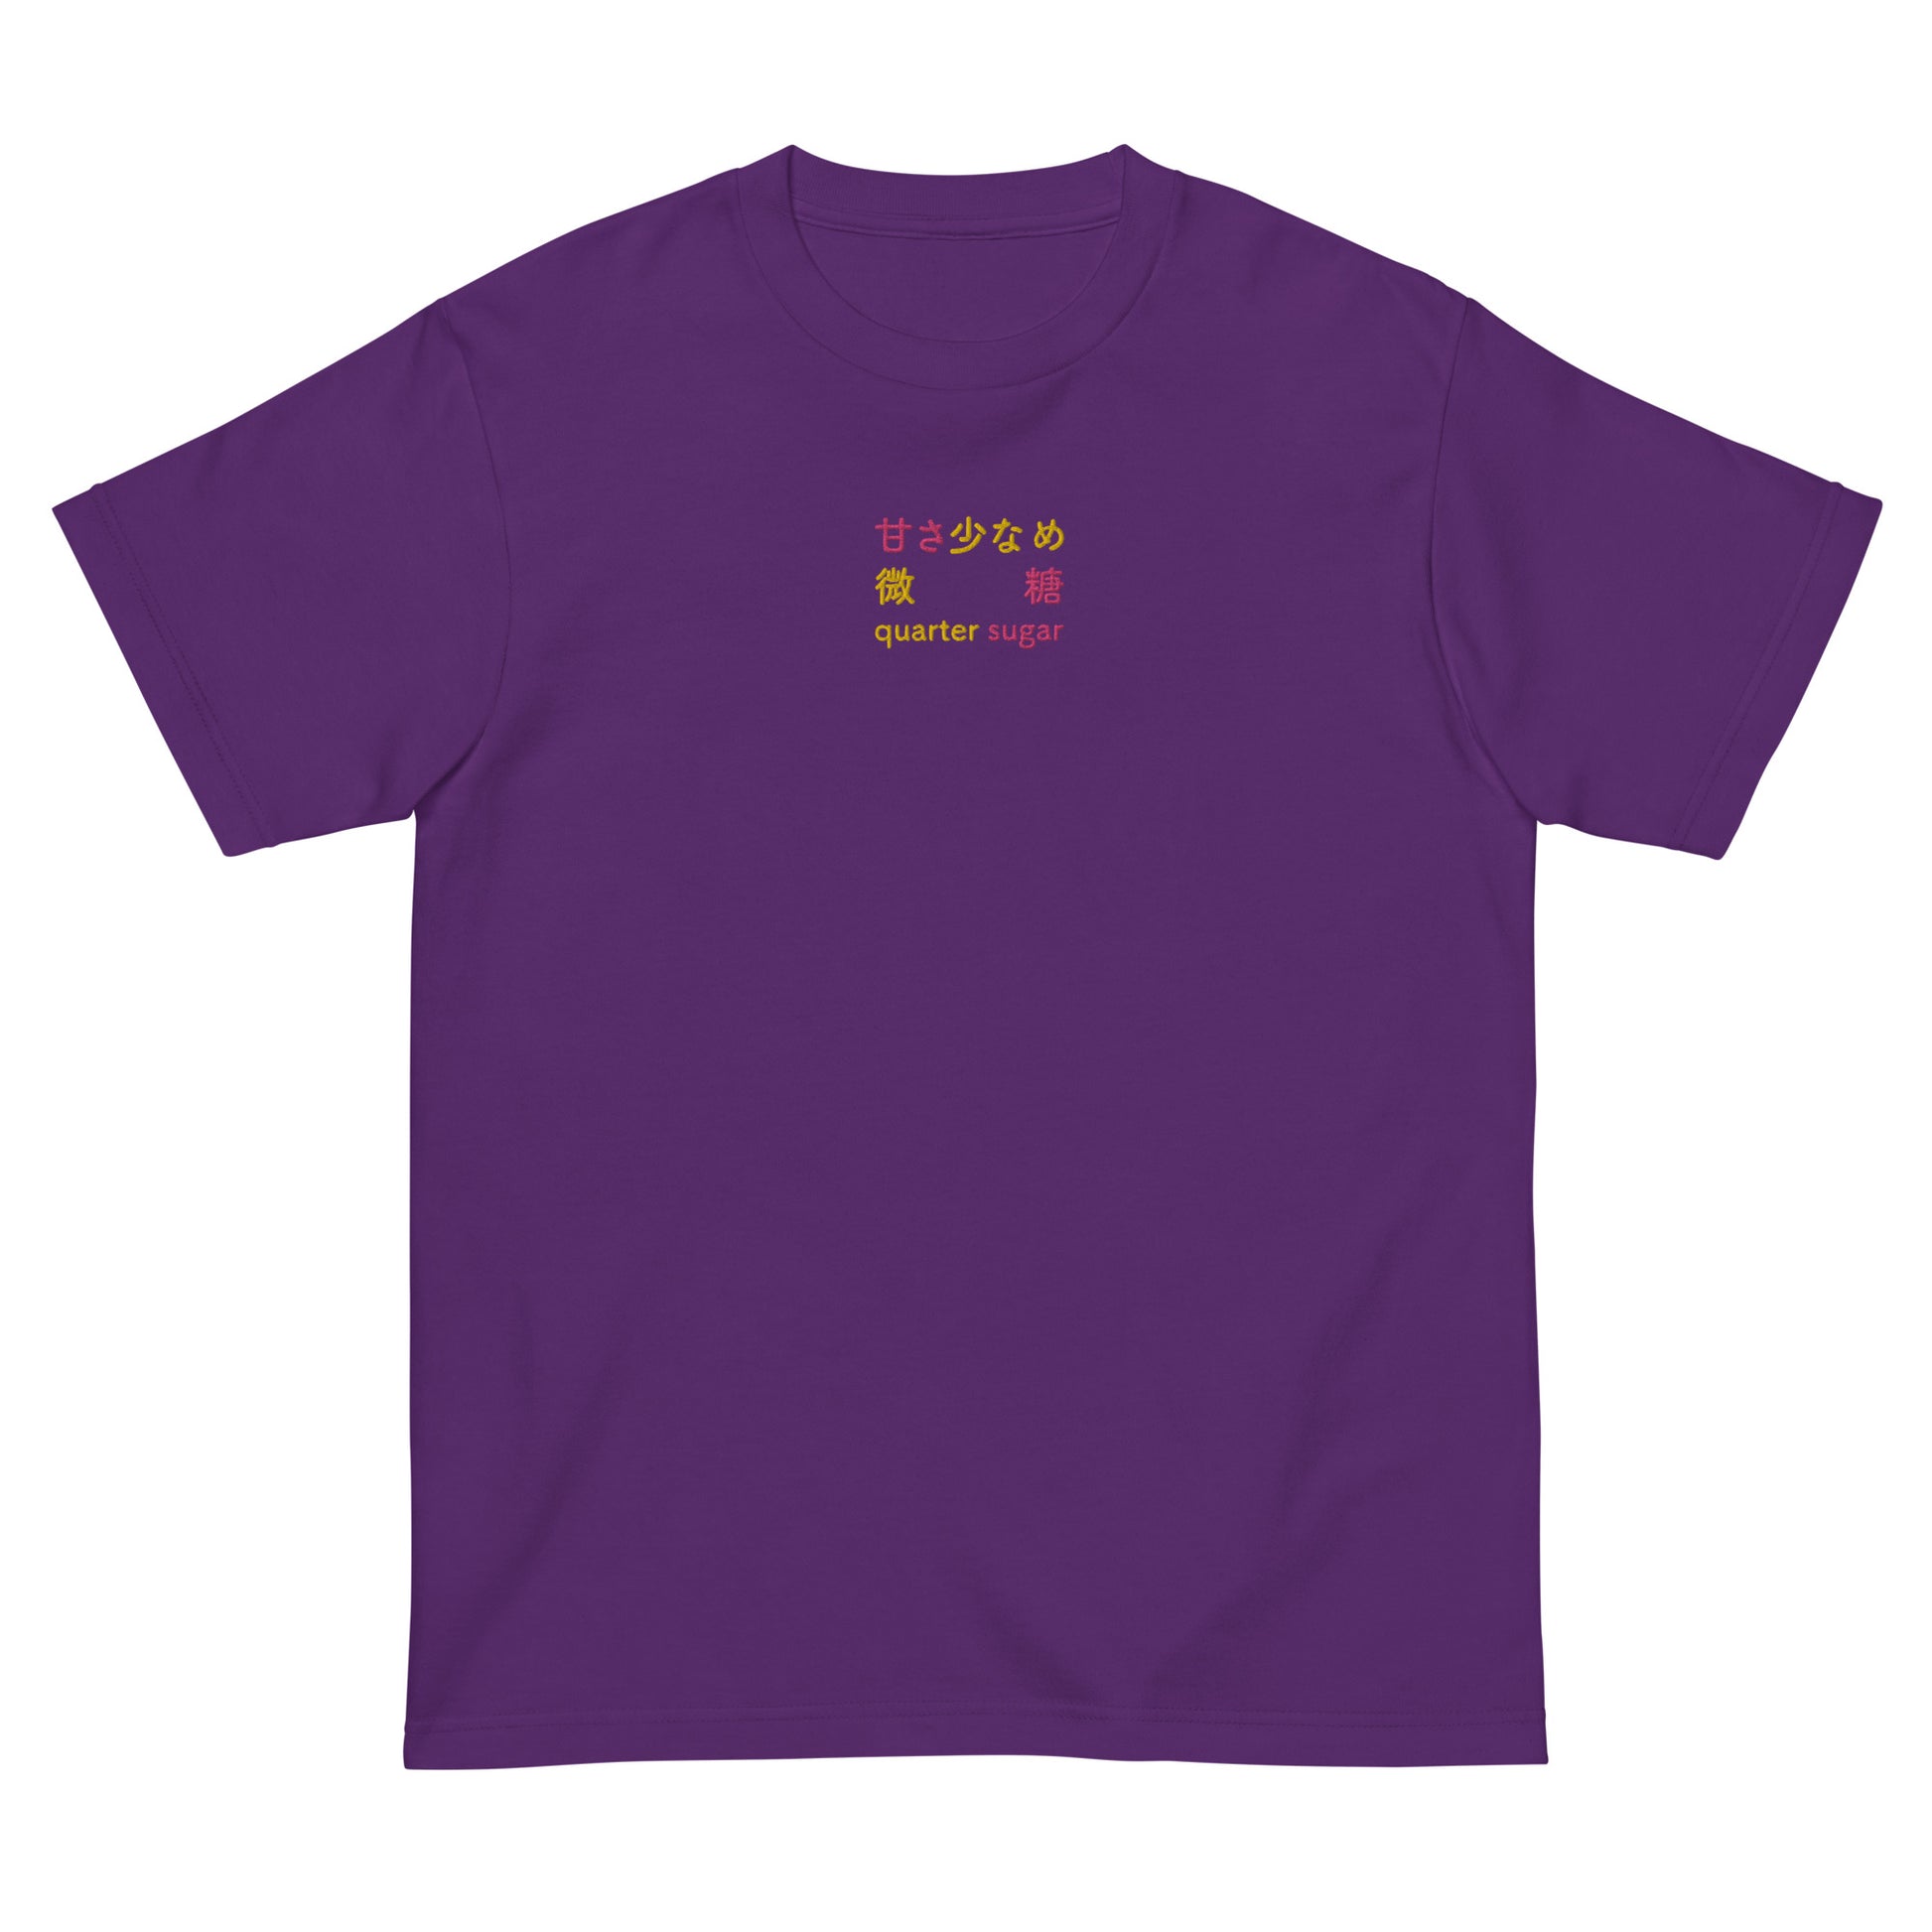 Purple High Quality Tee - Front Design with an Yellow, Pink Embroidery "Quarter Sugar" in Japanese,Chinese and English